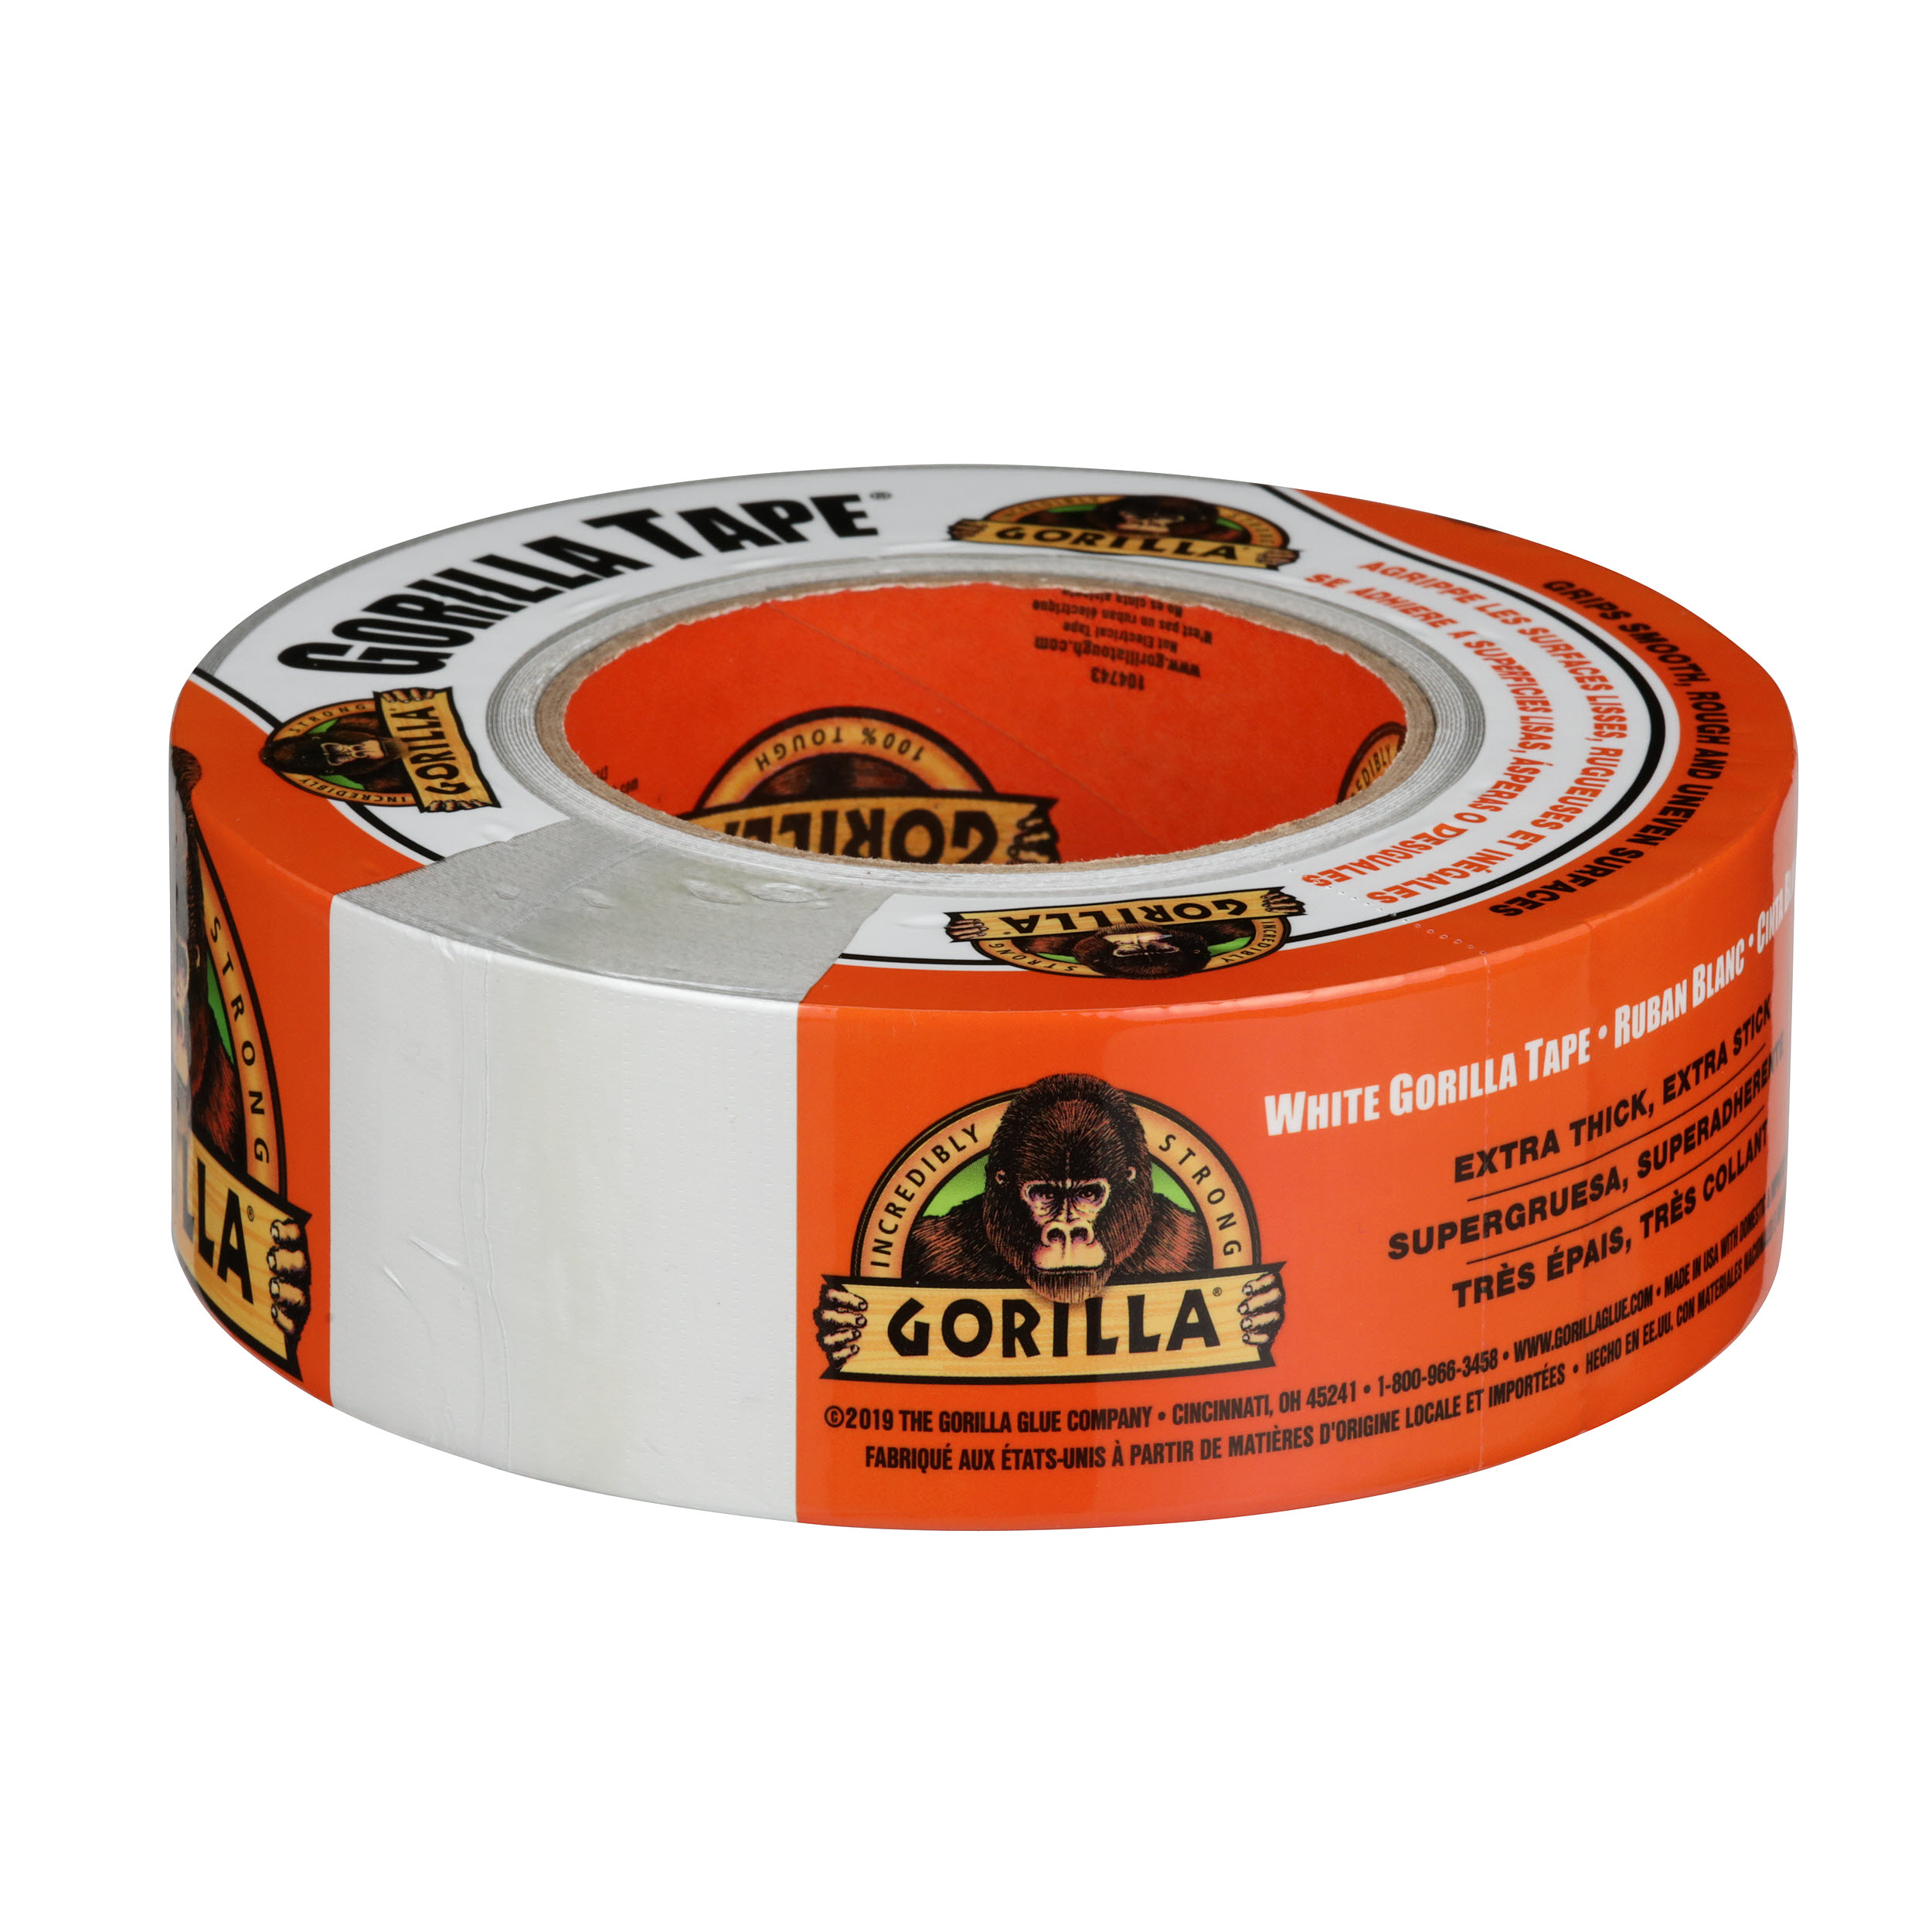 Gorilla Glue White Tape, 30yd Double Thick Adhesive Tape and